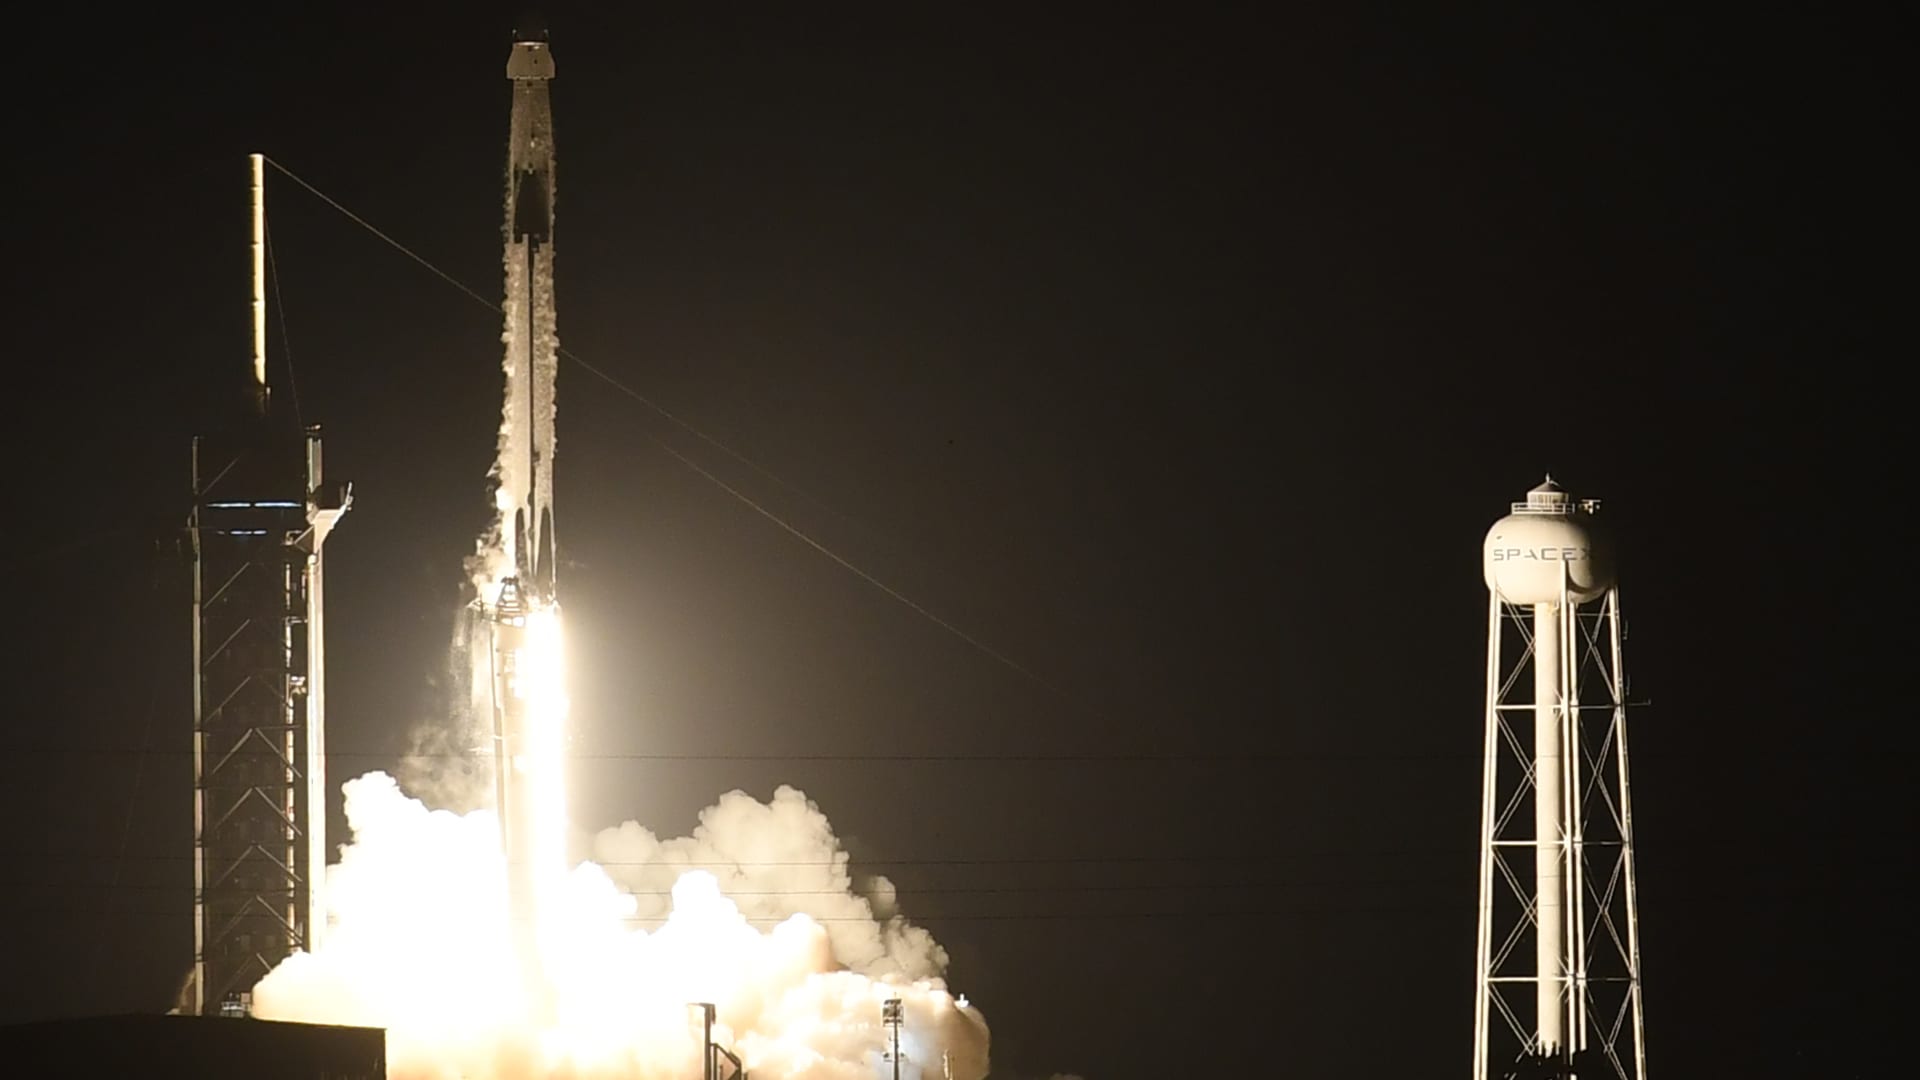 Elon Musk's SpaceX launches Crew-1 mission, beginning a new era of NASA human spaceflight